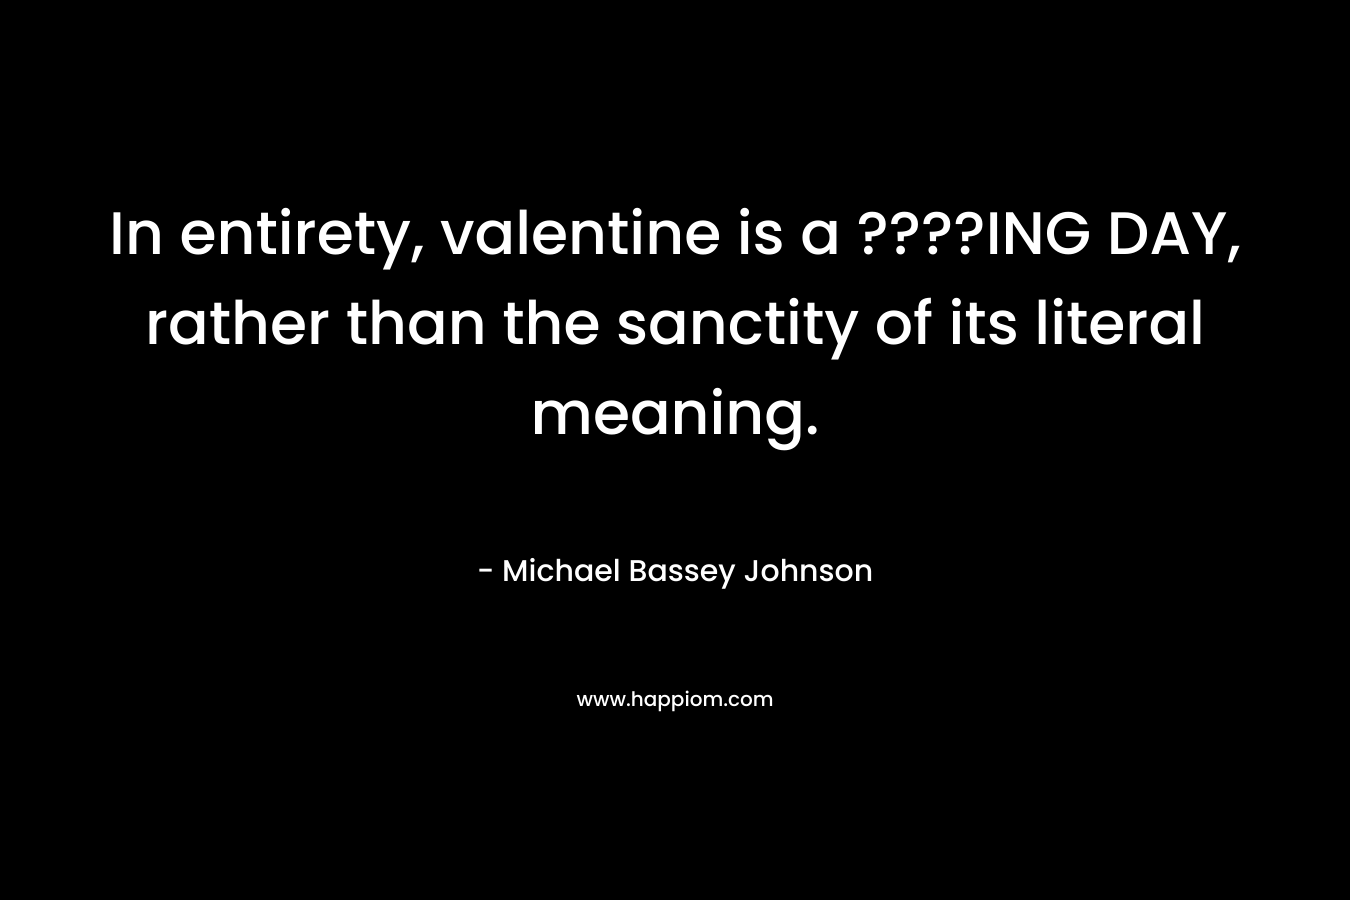 In entirety, valentine is a ????ING DAY, rather than the sanctity of its literal meaning.